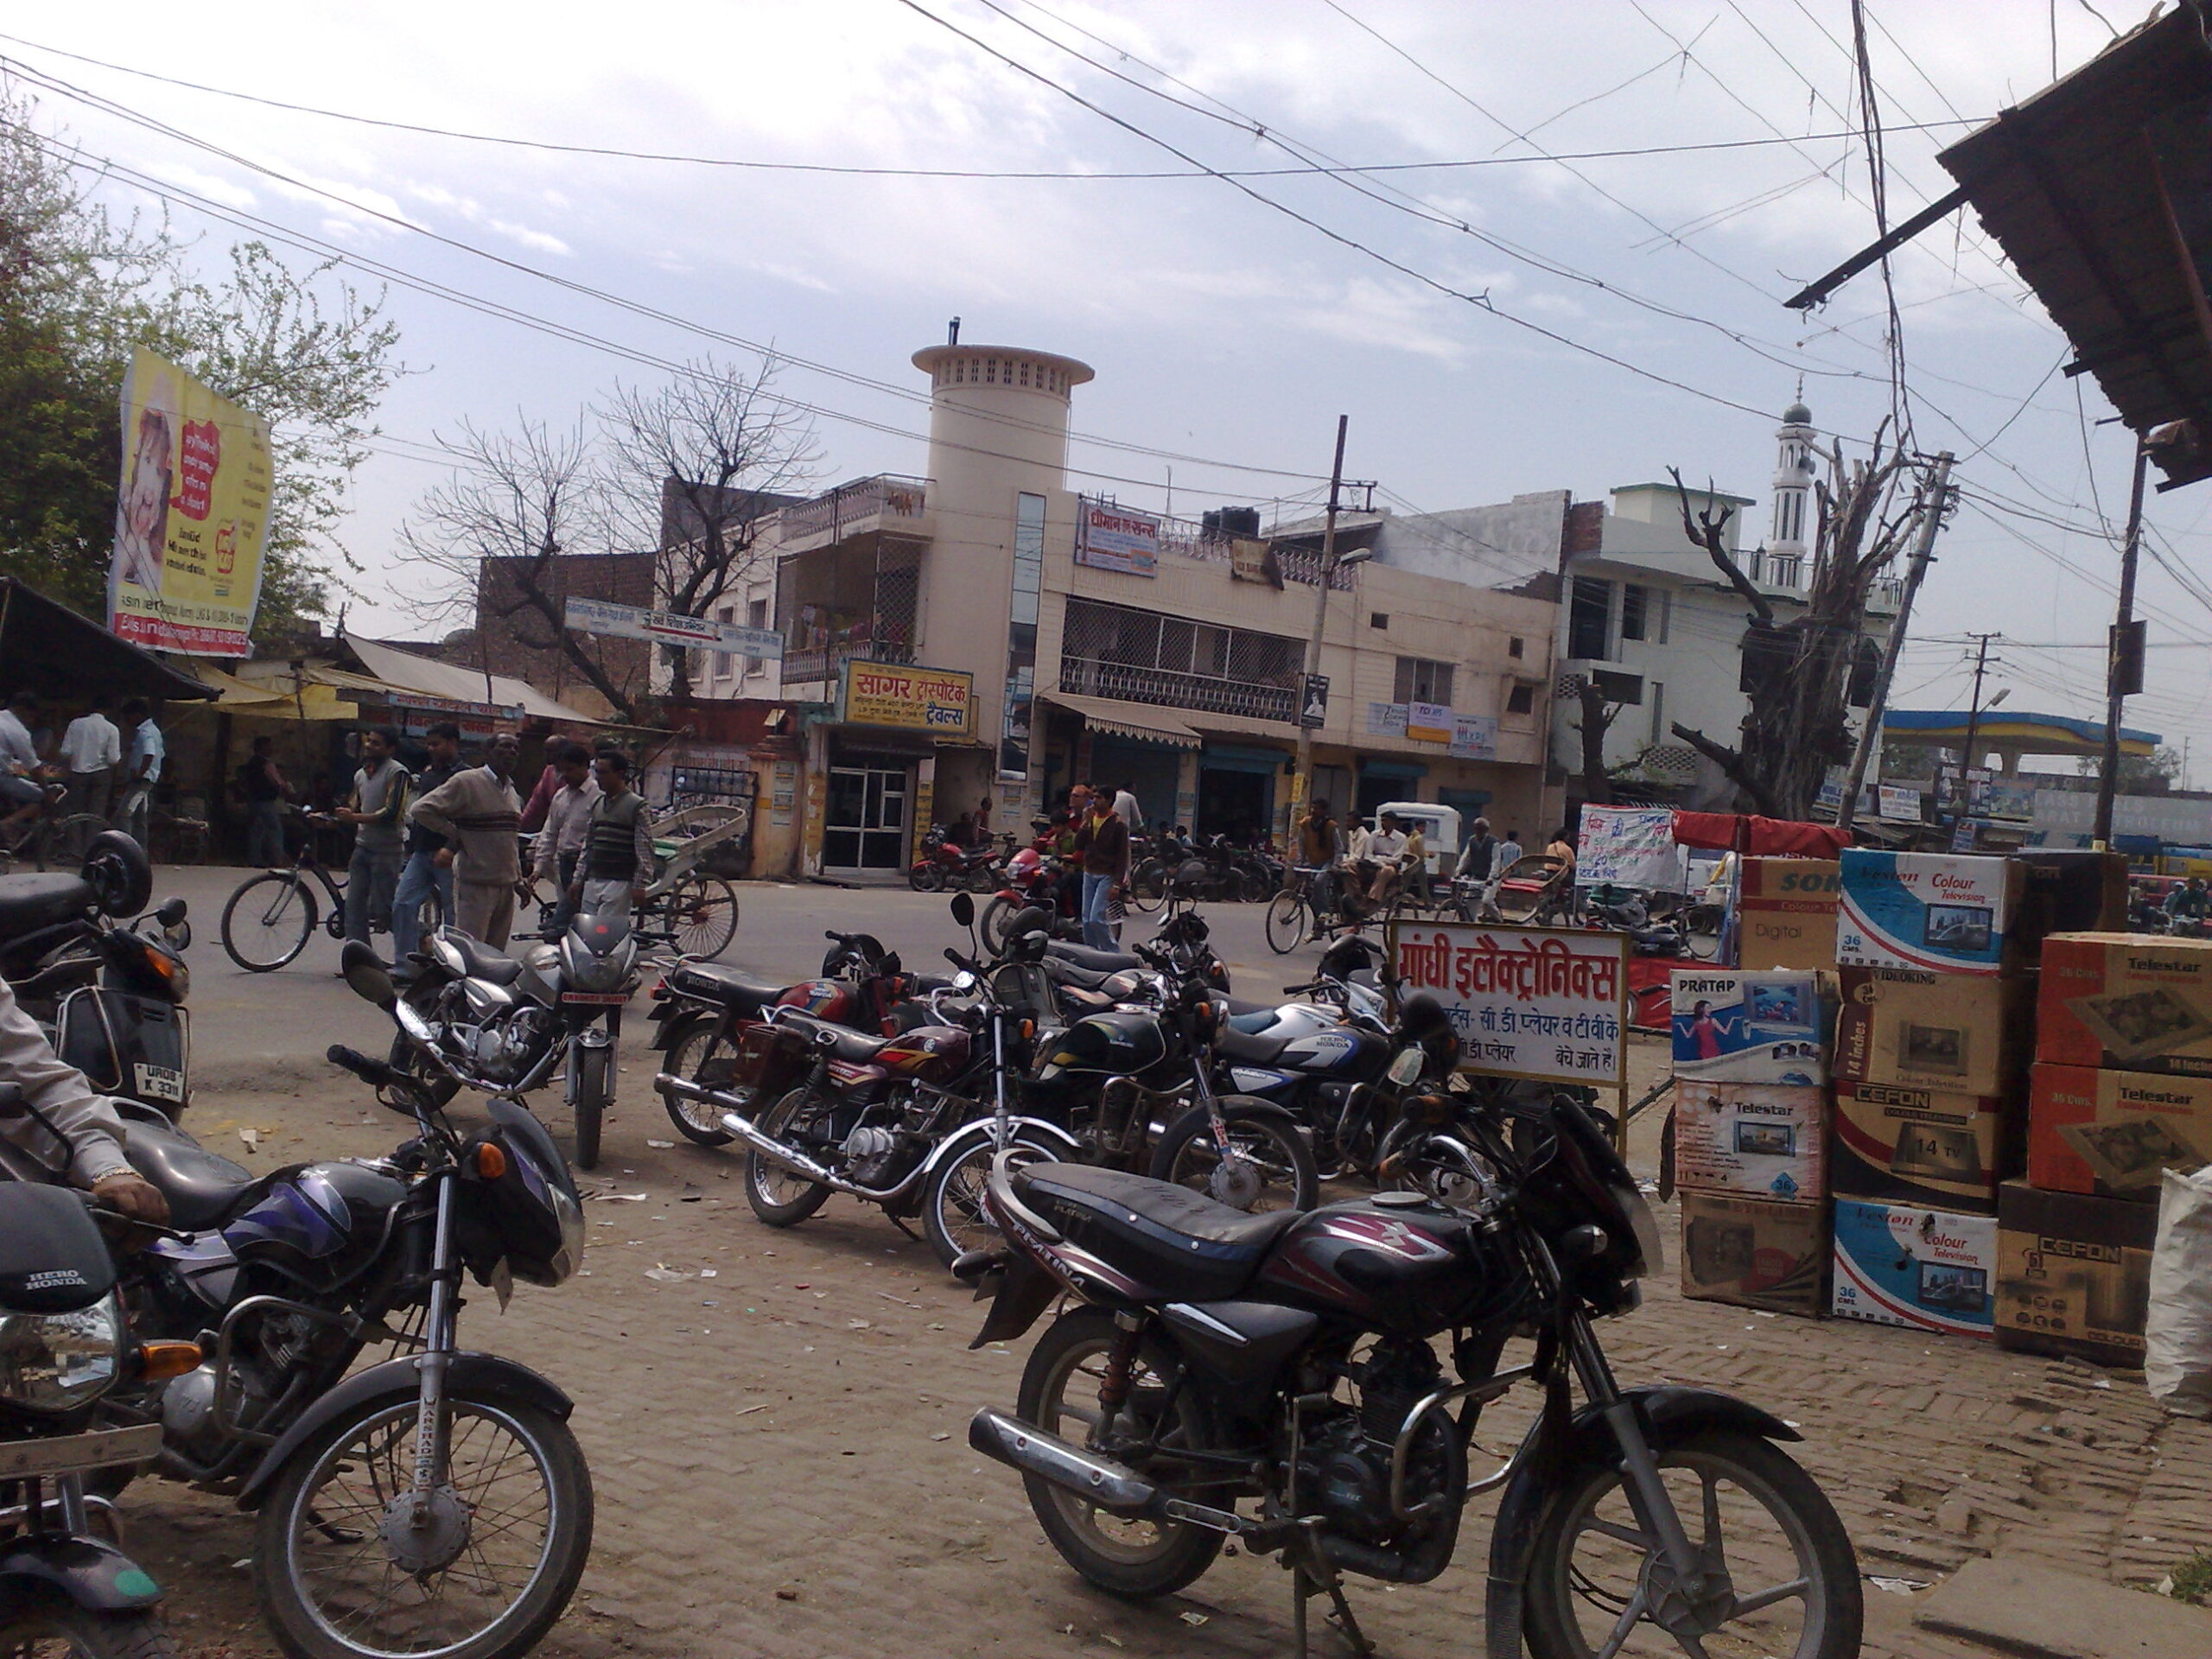 After Many Years Visited My Childhood City & Home : Saharanpur, India (Feb'09) 15